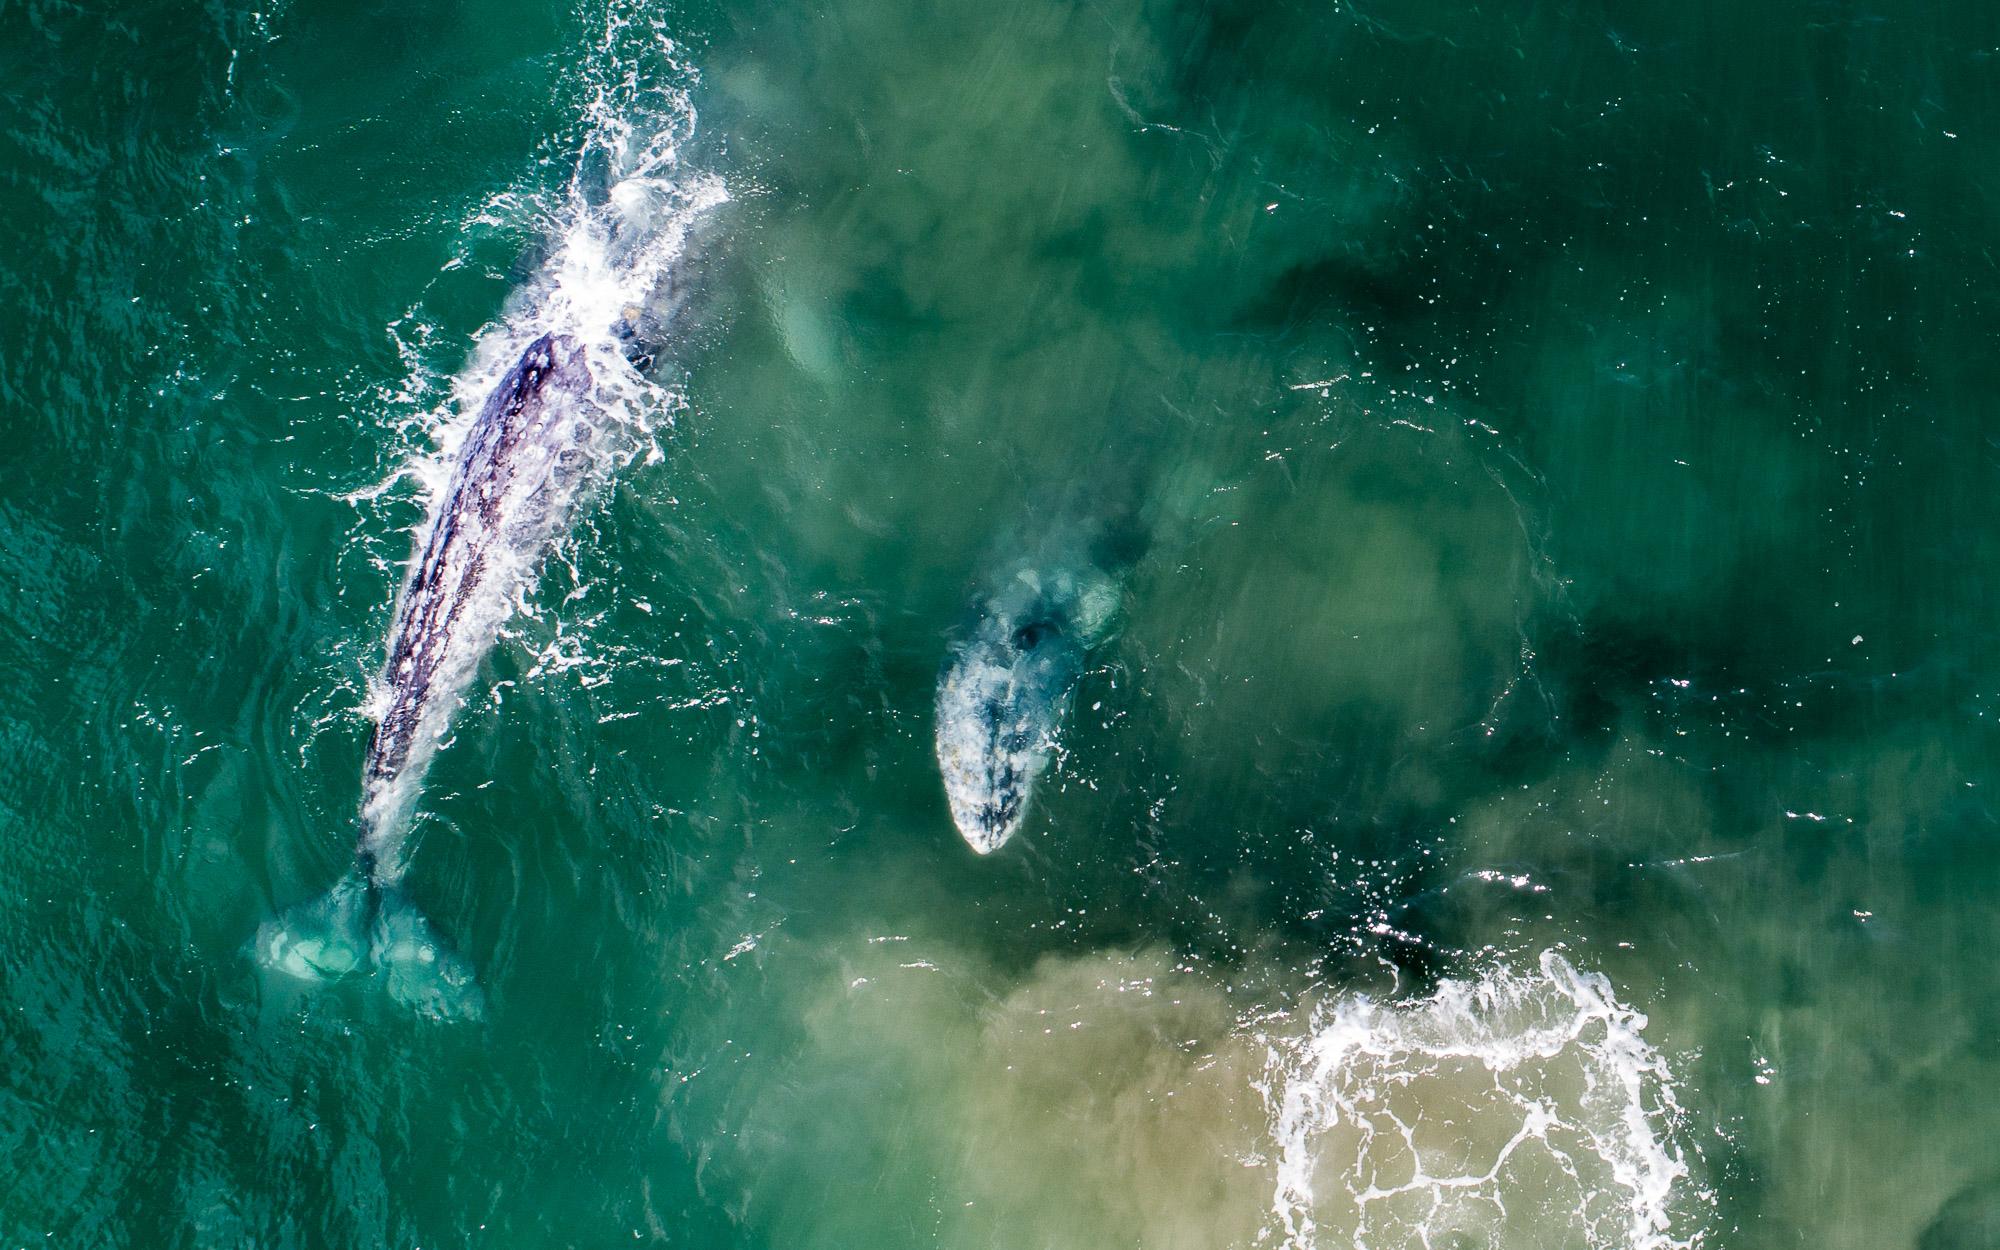 Earth Day Print Sale - 17. Gray Whale migration, March 2018